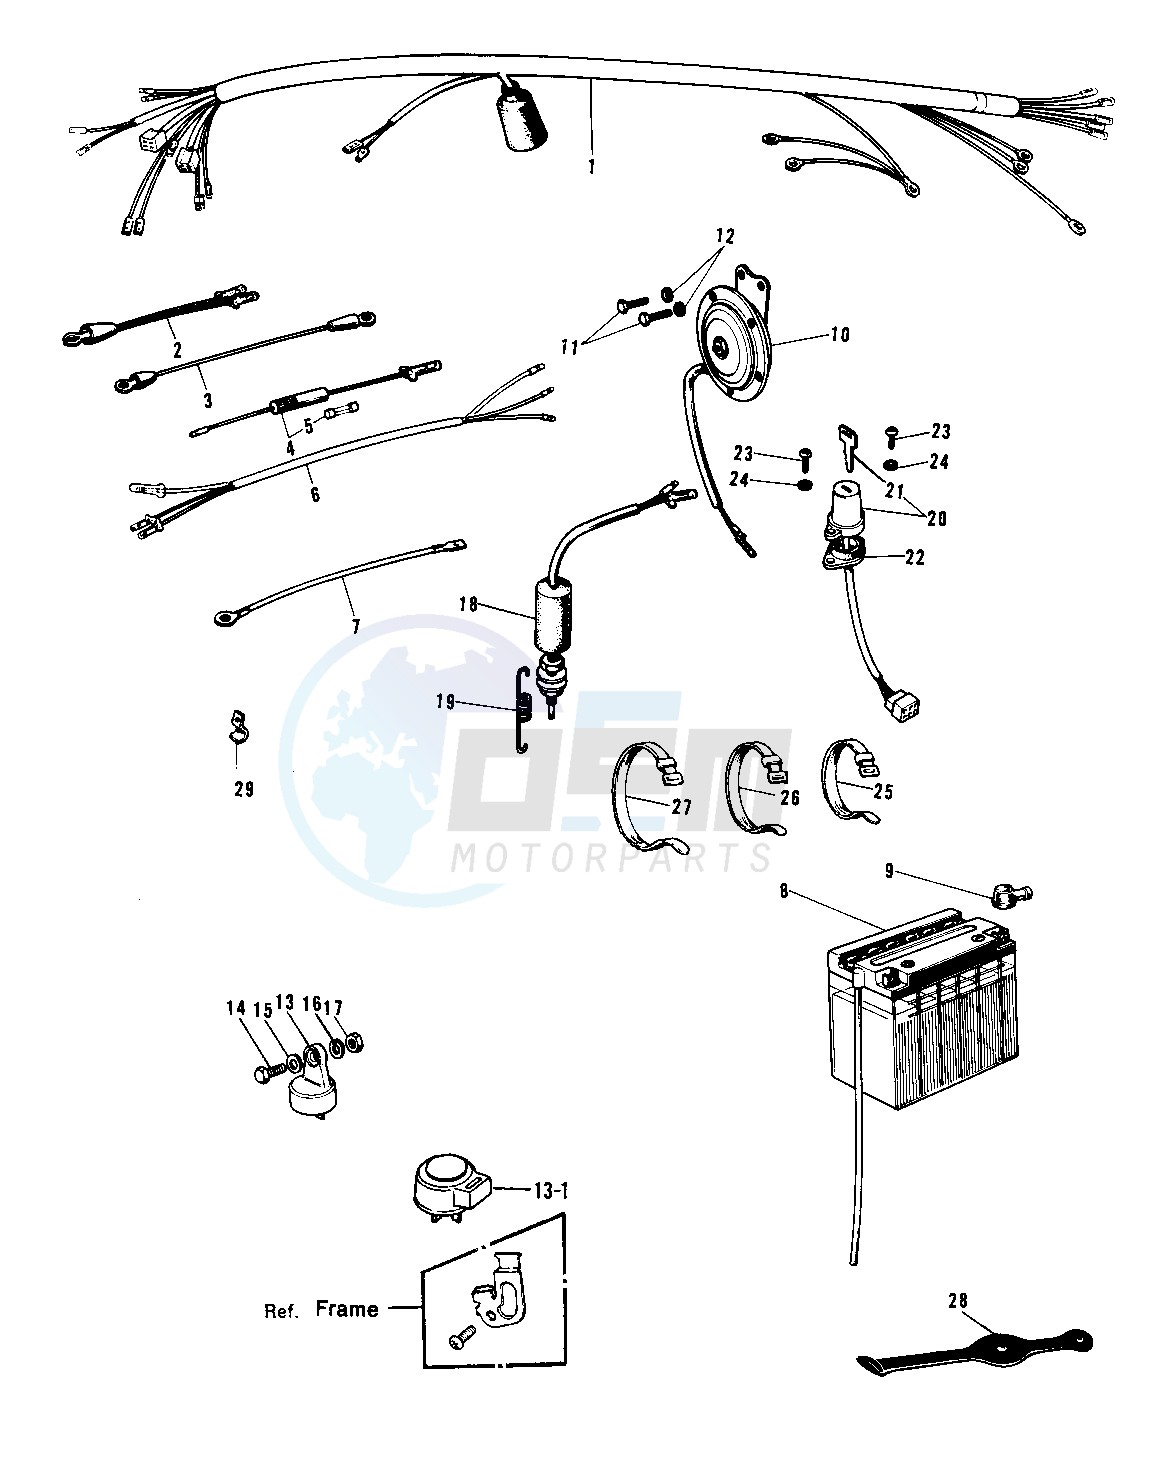 CHASSIS ELECTRICAL EQUIPMENT -- H1-B- - blueprint